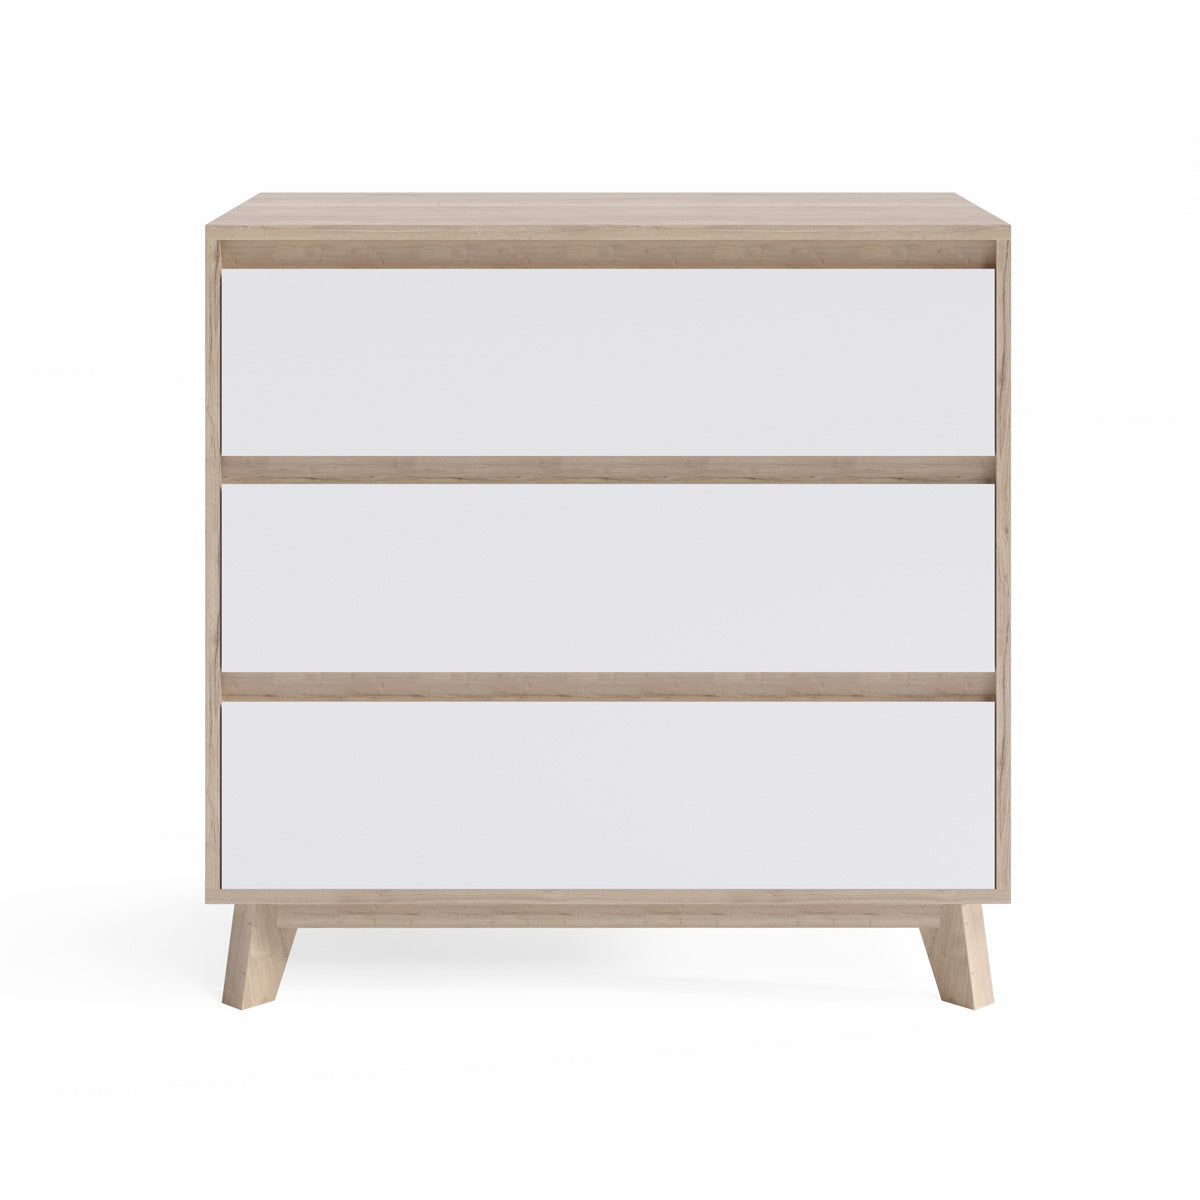 Three Drawer Wooden Bedroom Chest of Drawers (Kinfolk Collection)